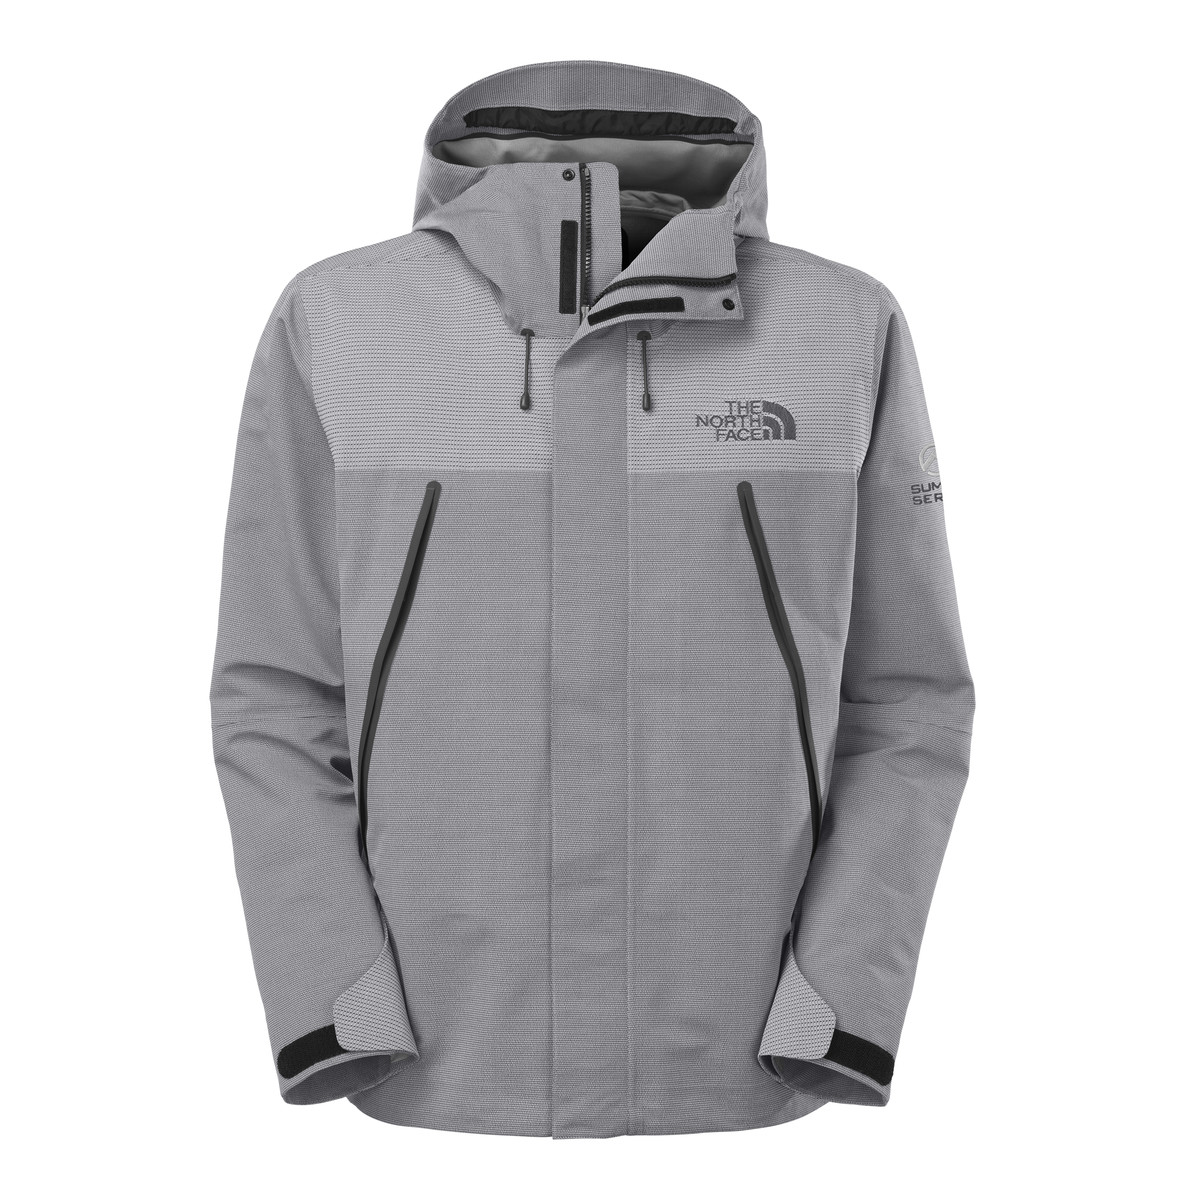 The North Face Mountain Guide Jacket Reviews - Trailspace.com